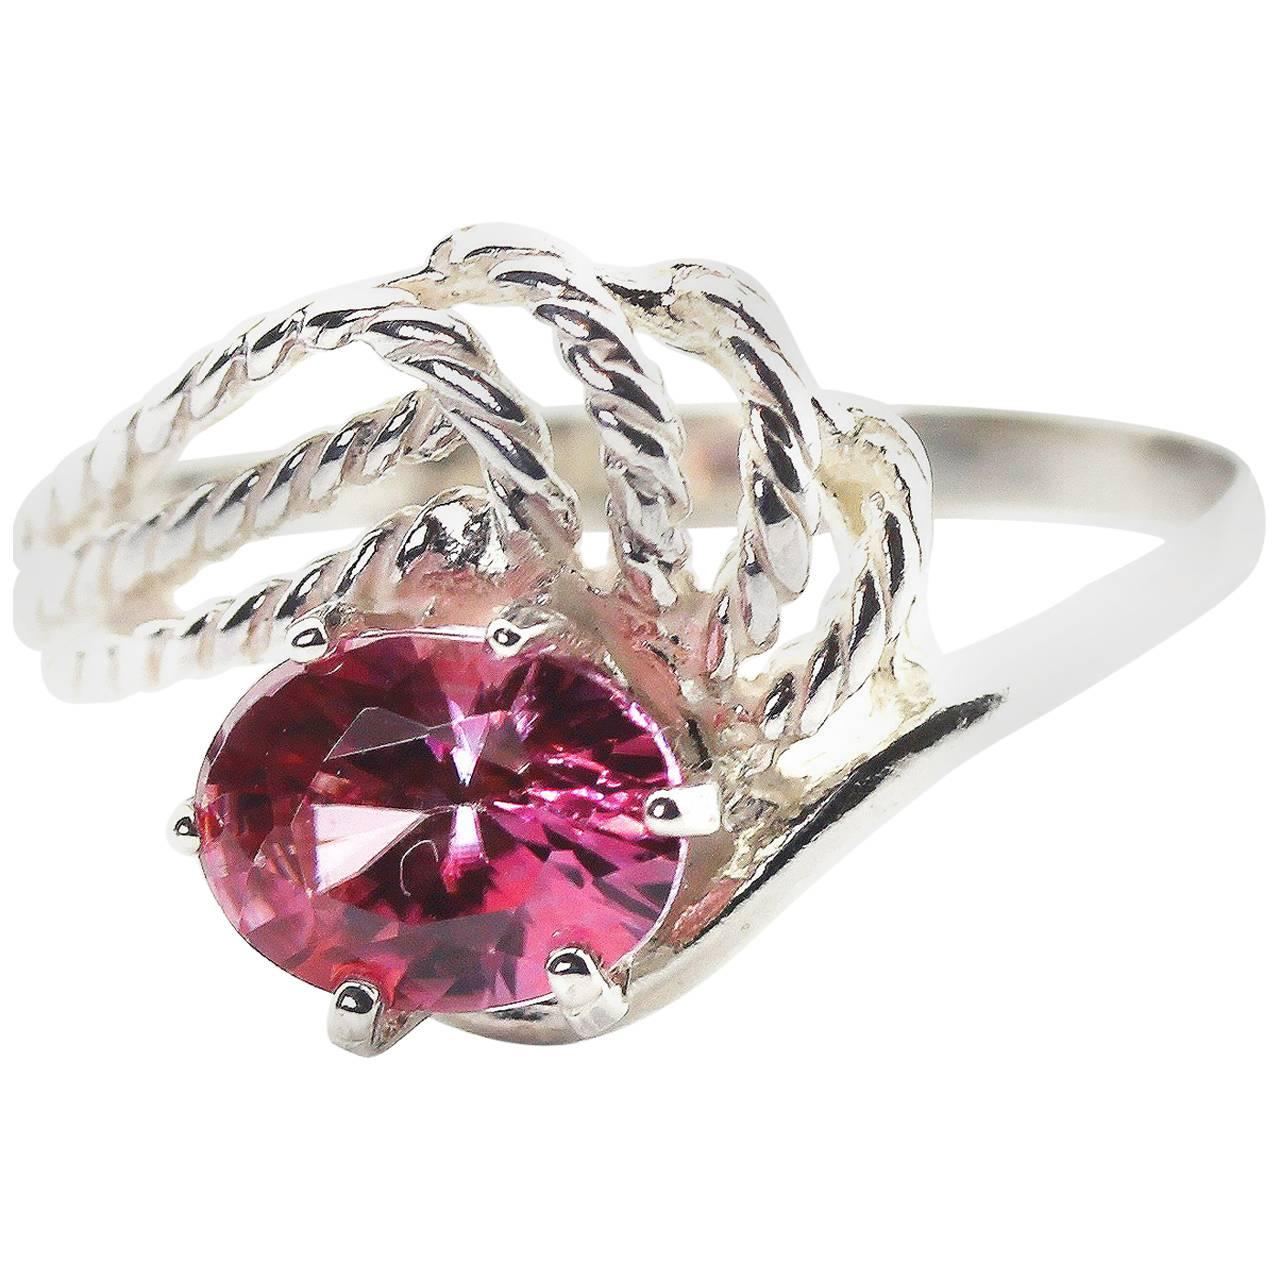 AJD Brilliant VERY RARE  1.43 Ct Pink/red Spinel Sterling Silver Ring